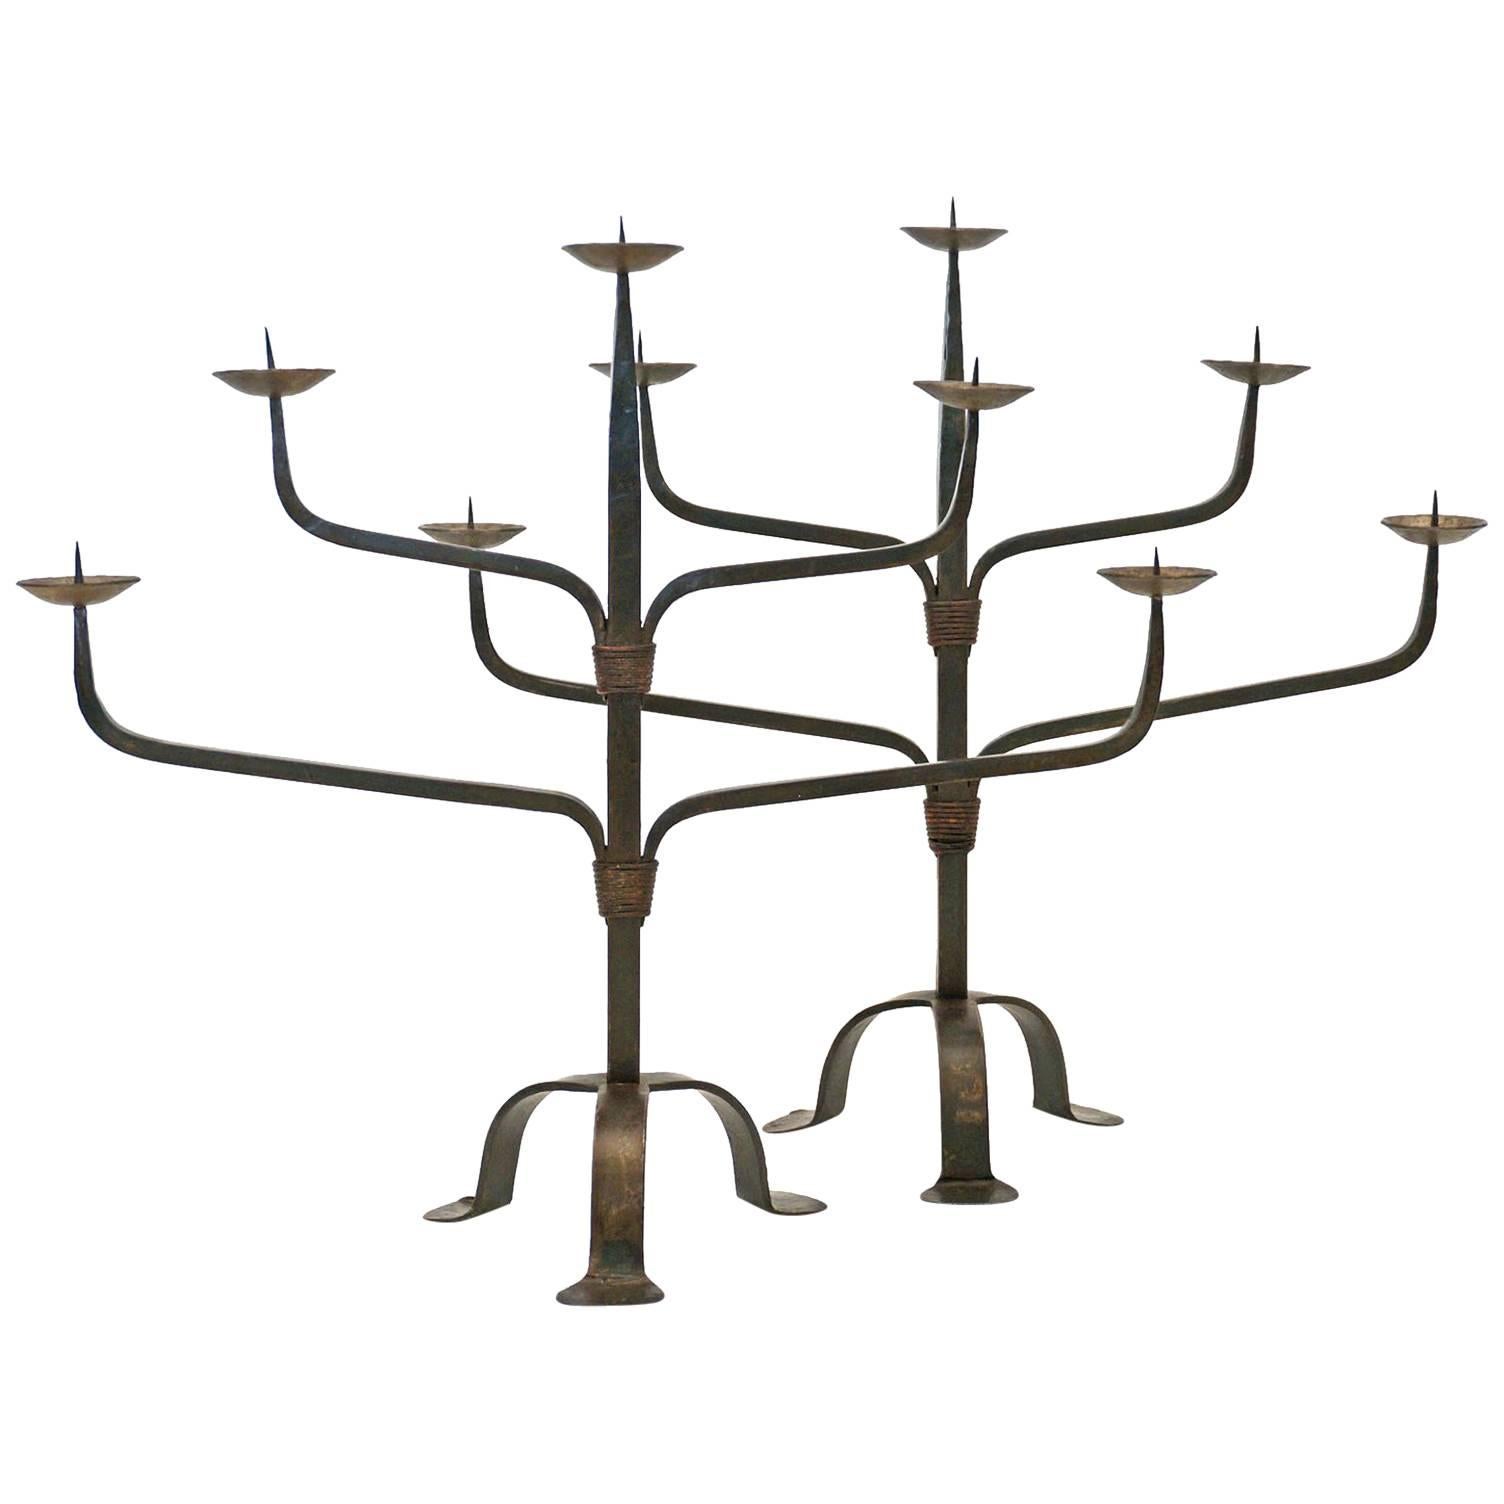 Pair of 1930s French Iron Candelabras